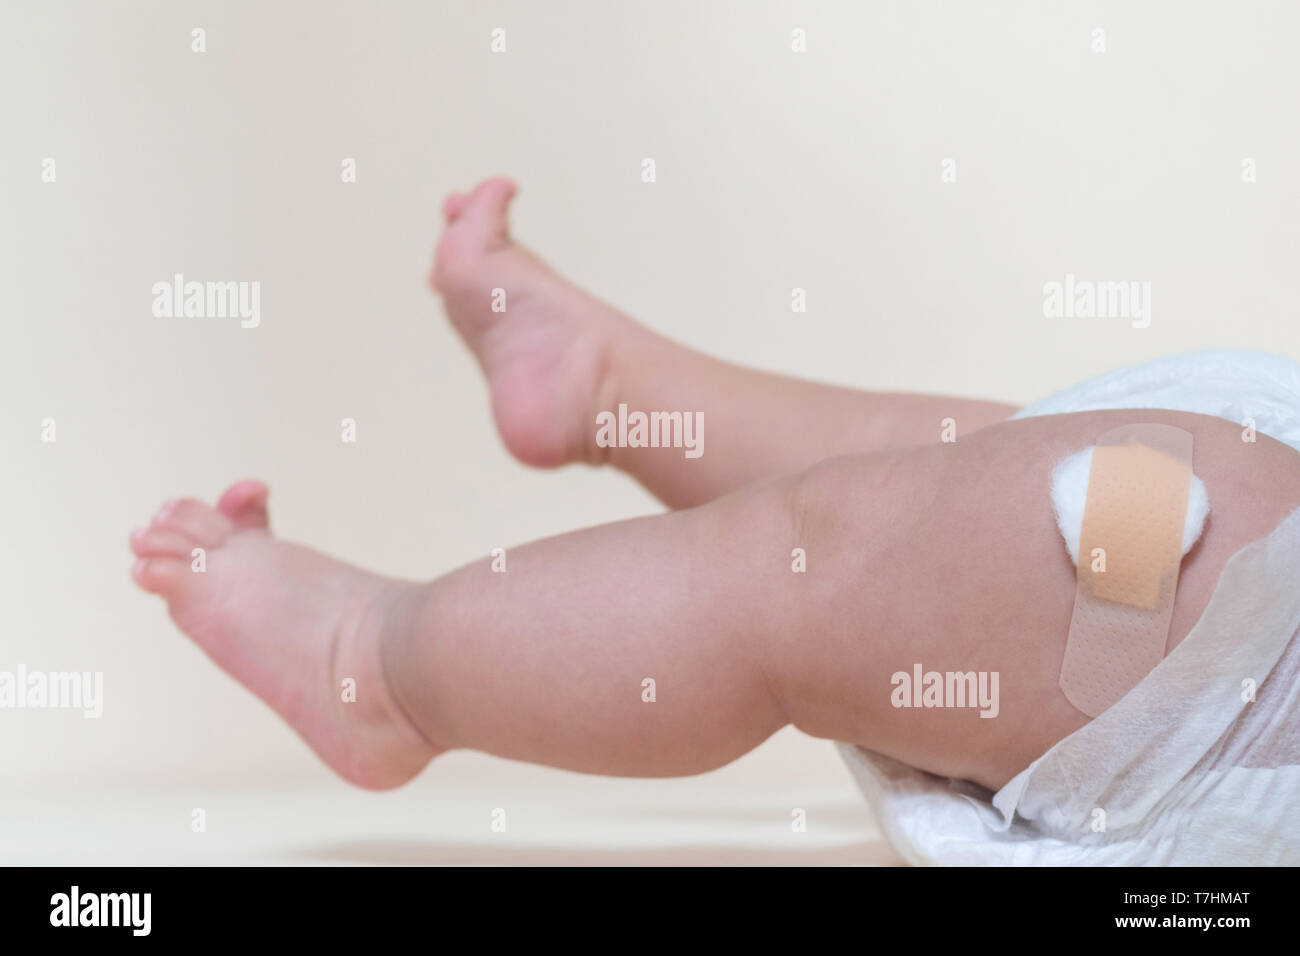 baby boy legs with a band-aid patch after taking a vaccine. doctor or nurse putting plaster on baby leg at the hospital. Stock Photo